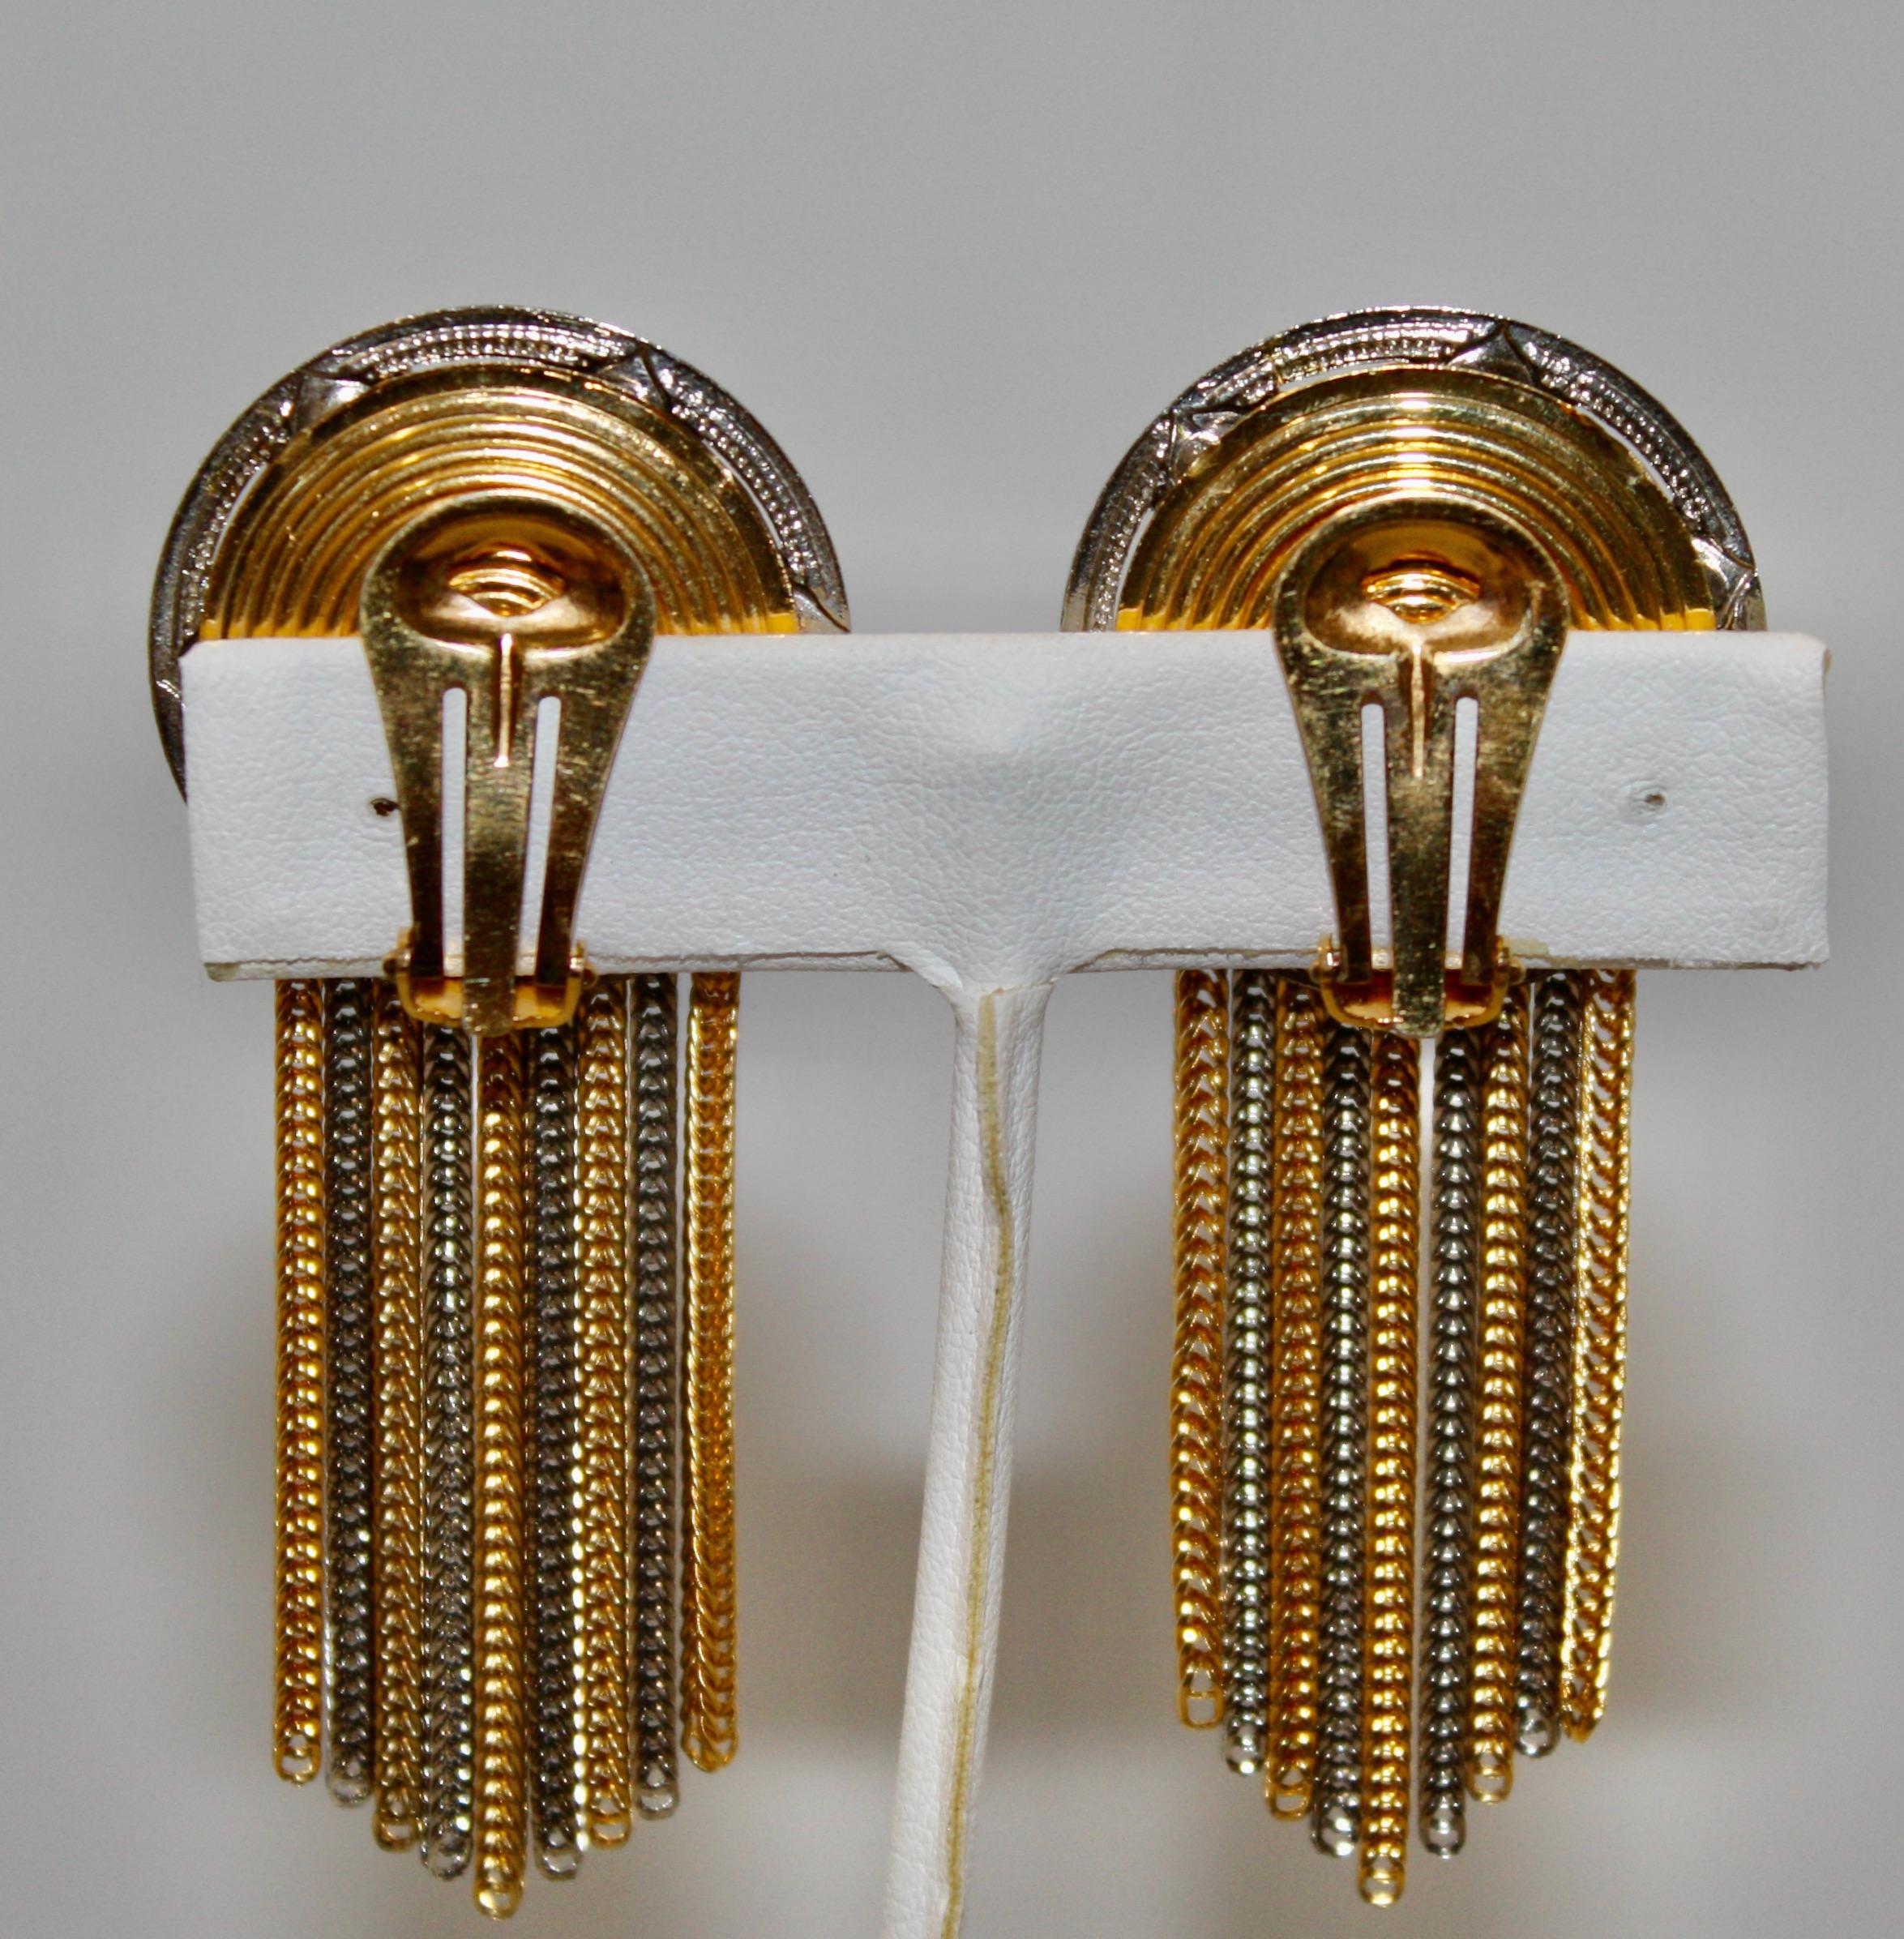 Baroque Françoise Montague Silver and Gold Tassel Earrings 